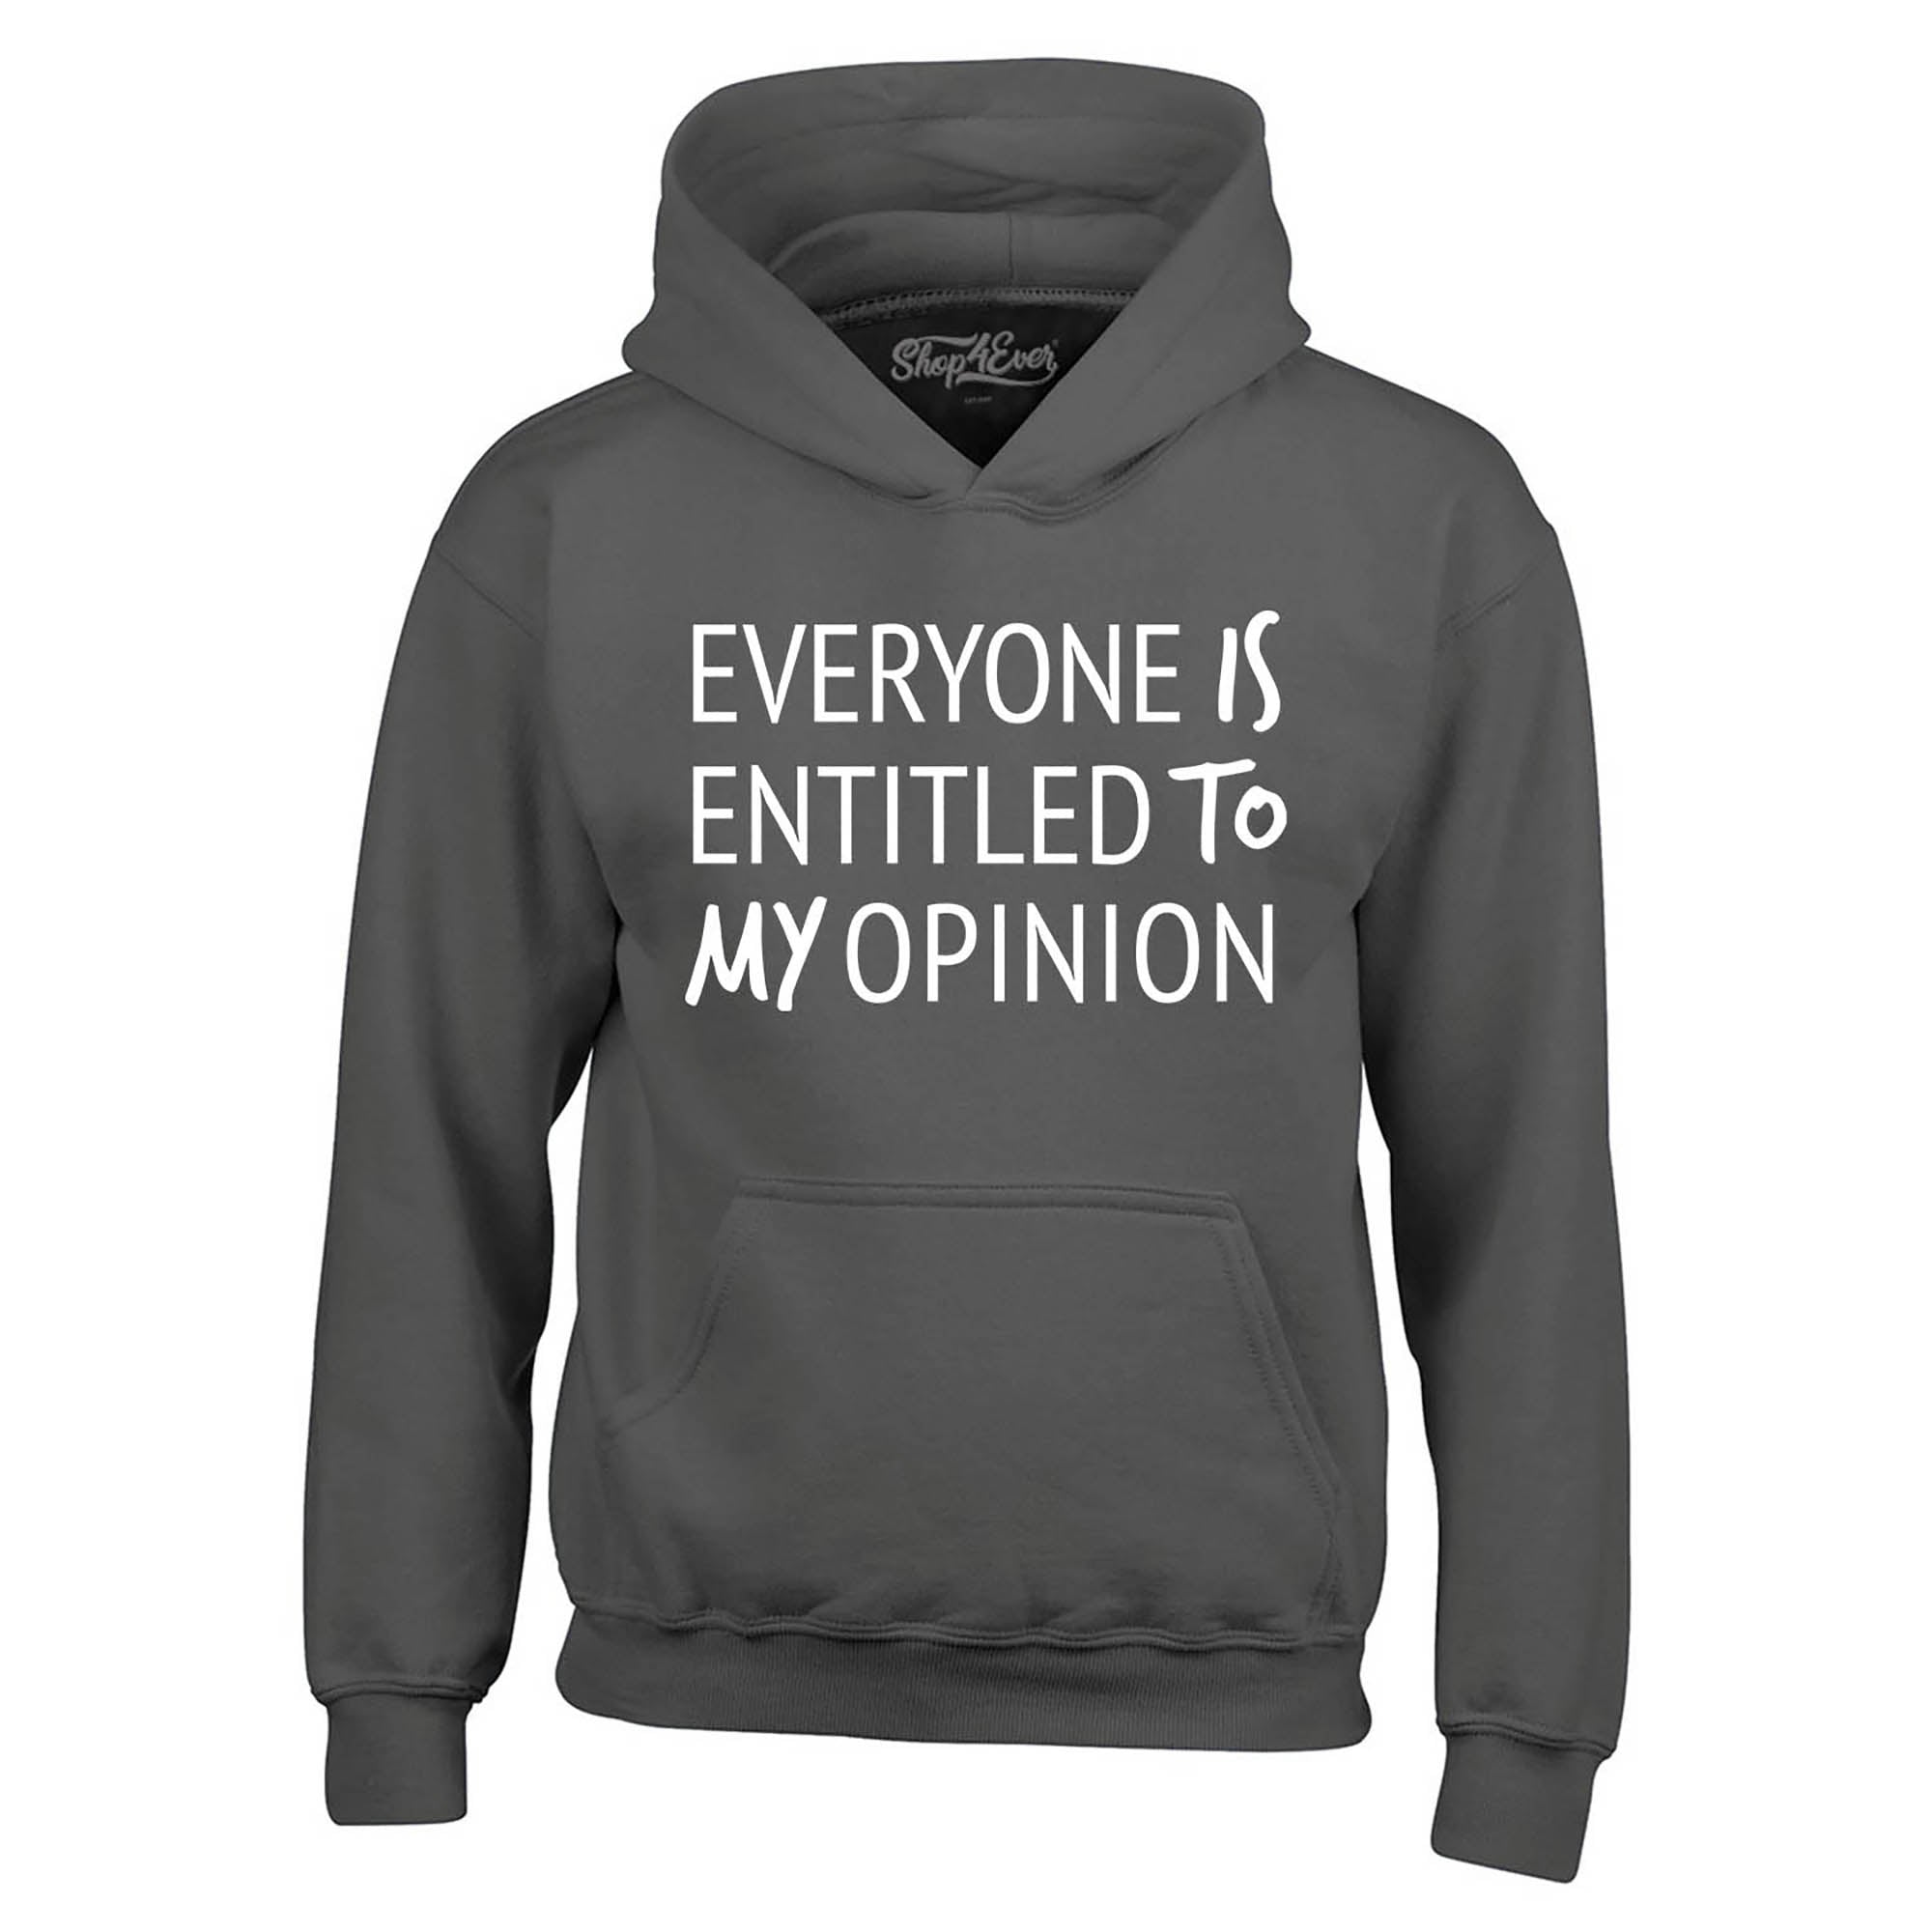 Everyone is Entitled to My Opinion Funny Sarcastic Hoodie Sweatshirts